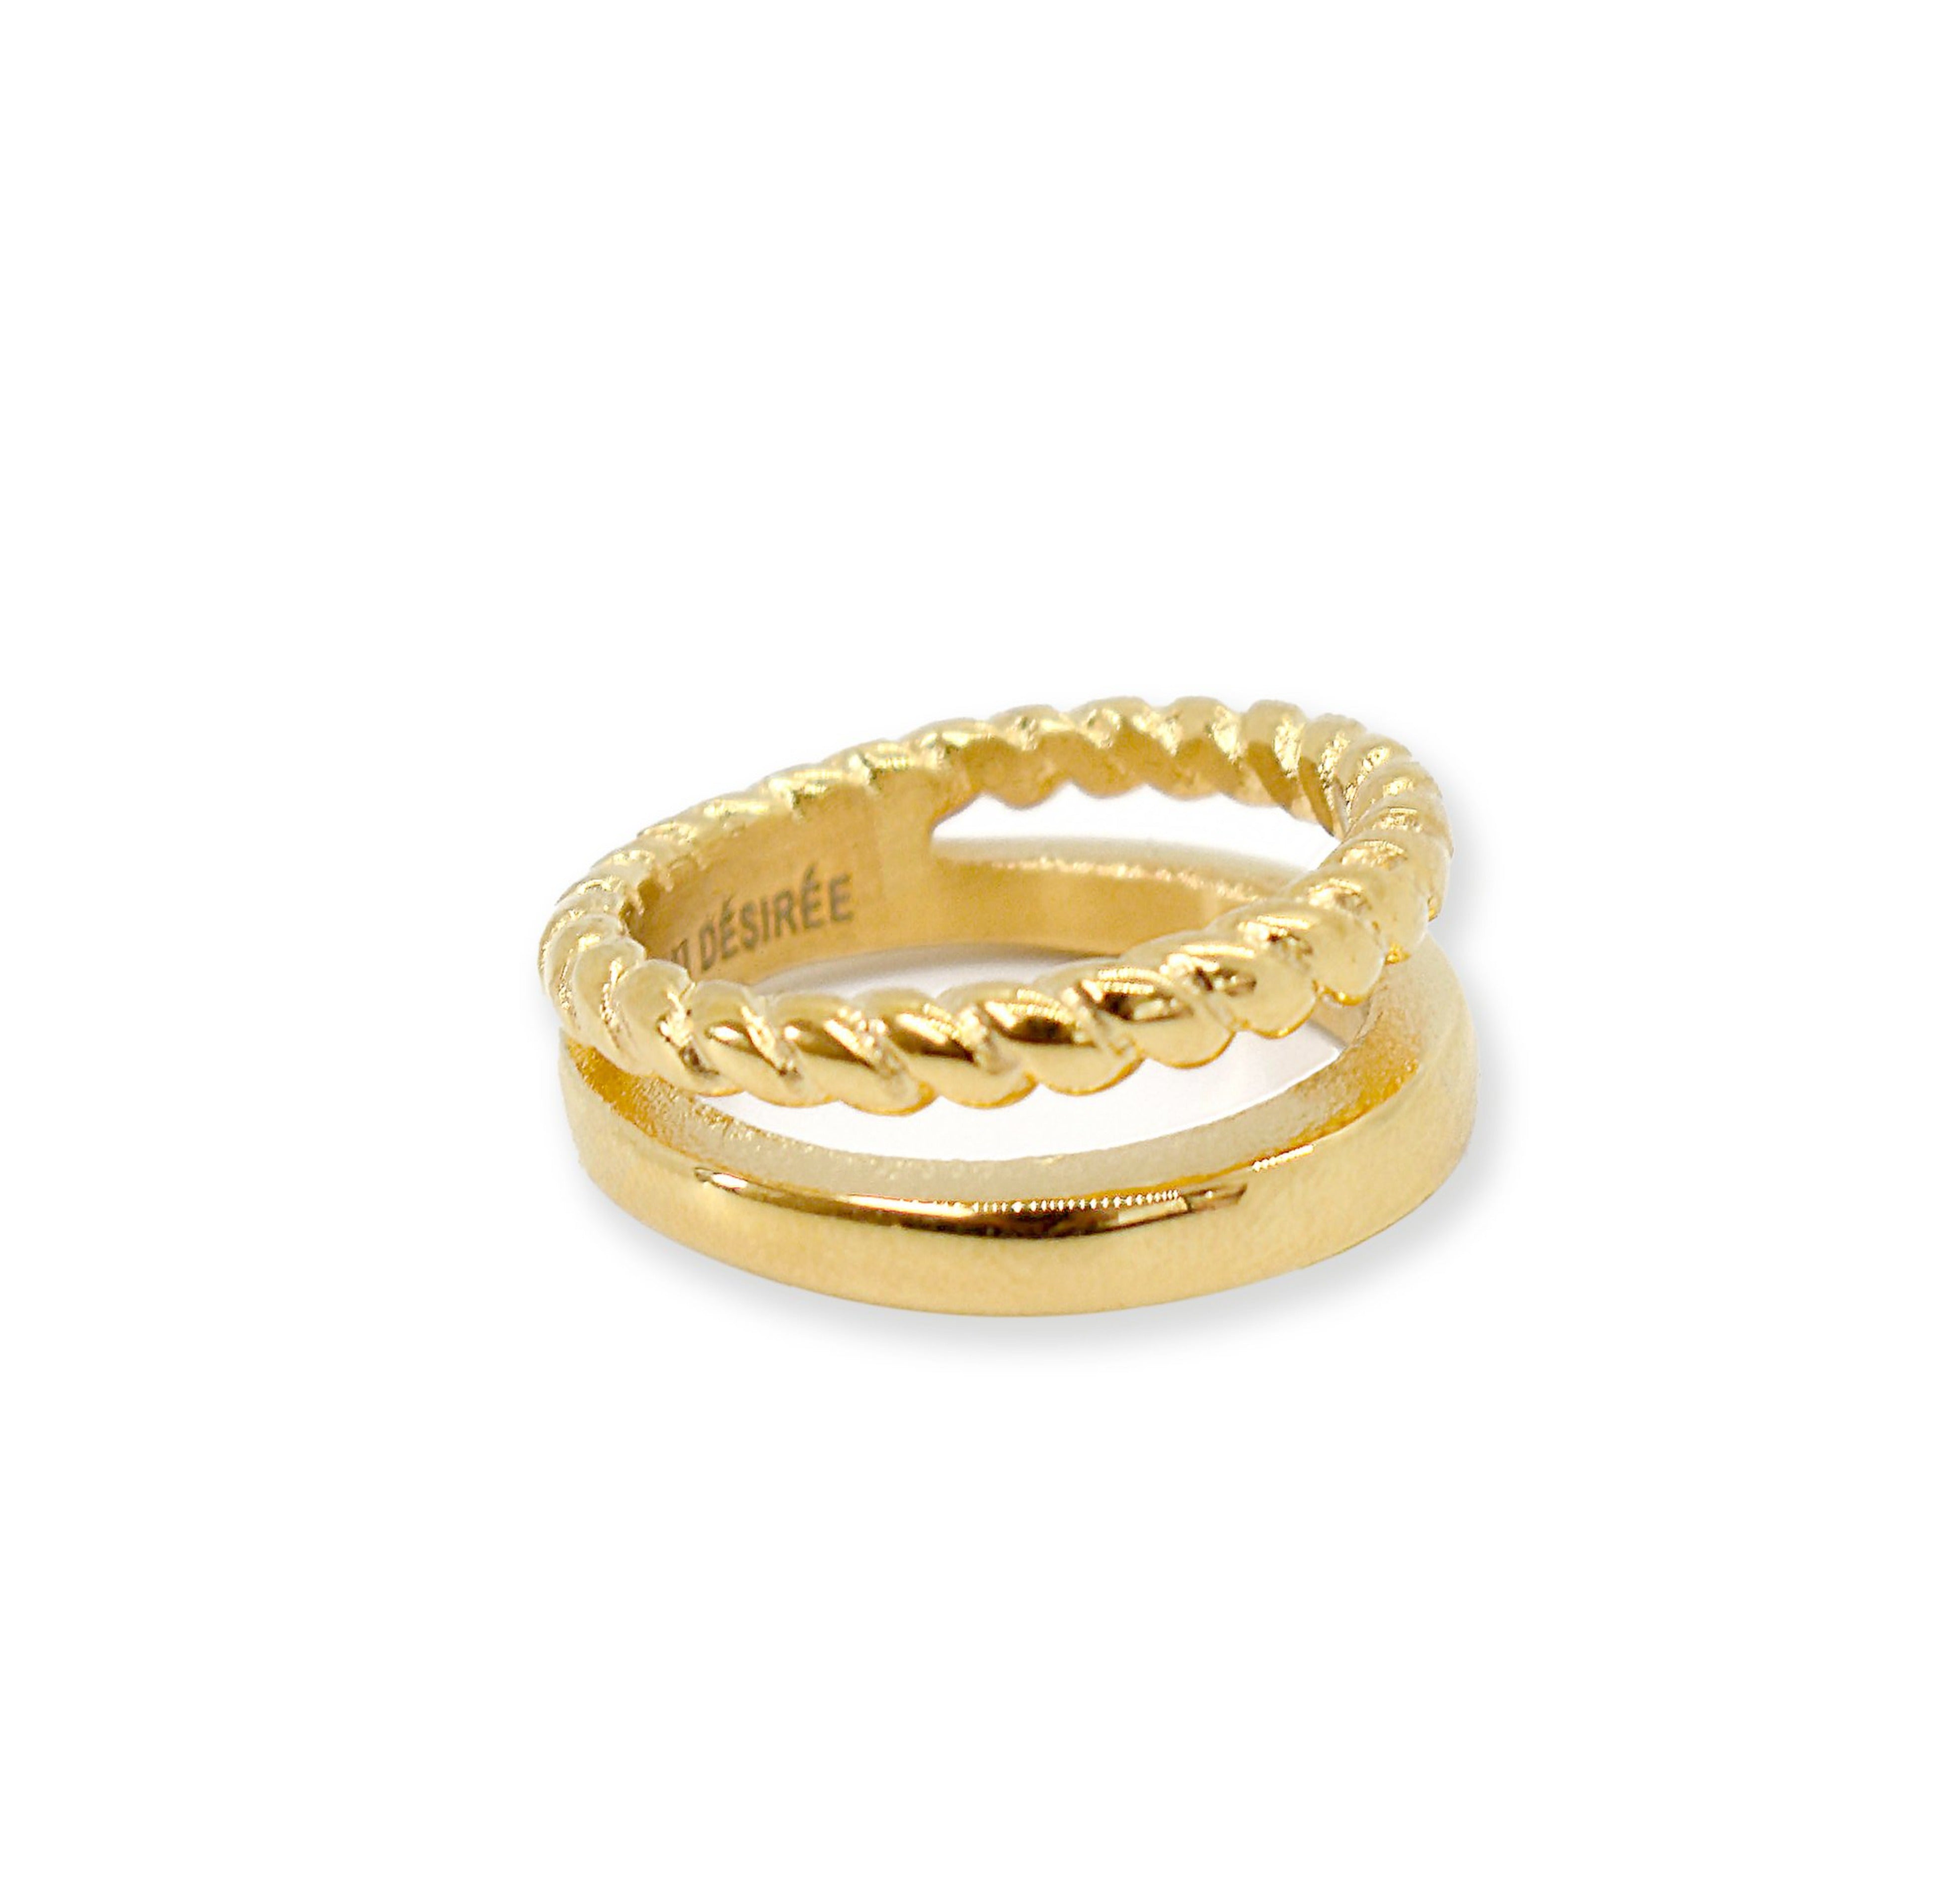 double ring band waterproof gold jewelry